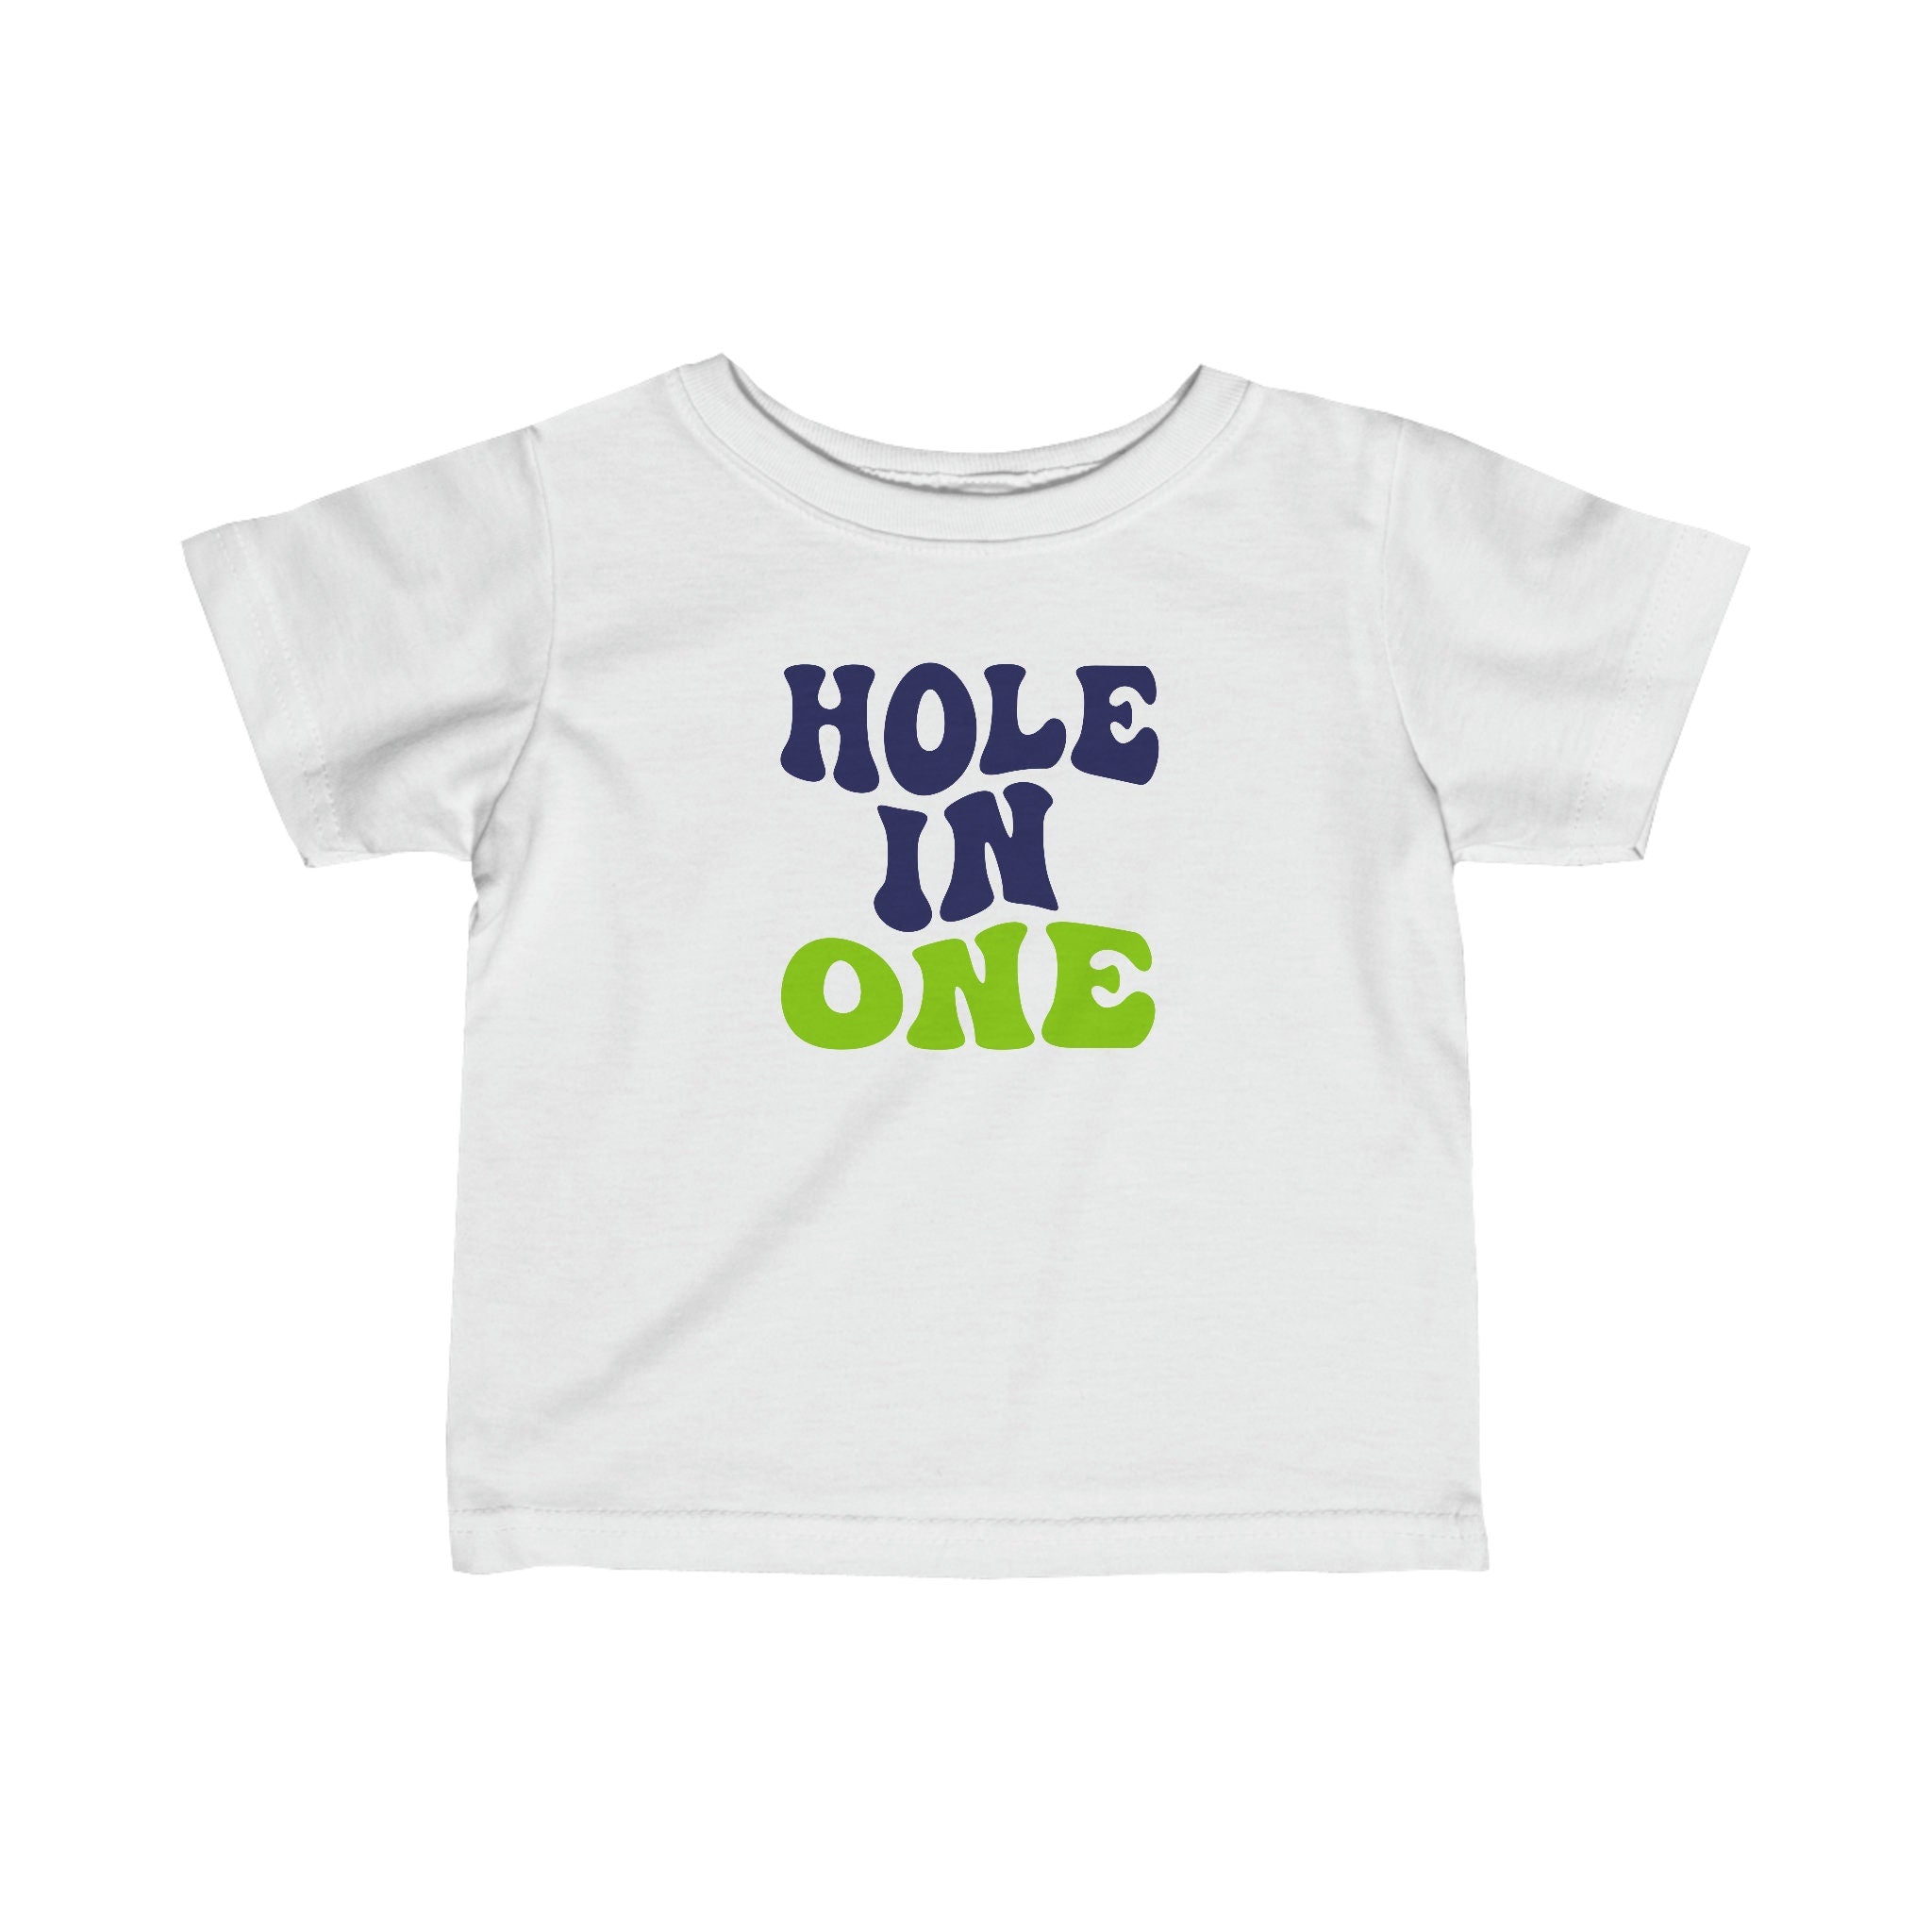 Hole in One Golf Birthday Shirt, 1st Birthday Outfit, Hole in One Birthday Party, Matching Family, Mommy and Me Shirts